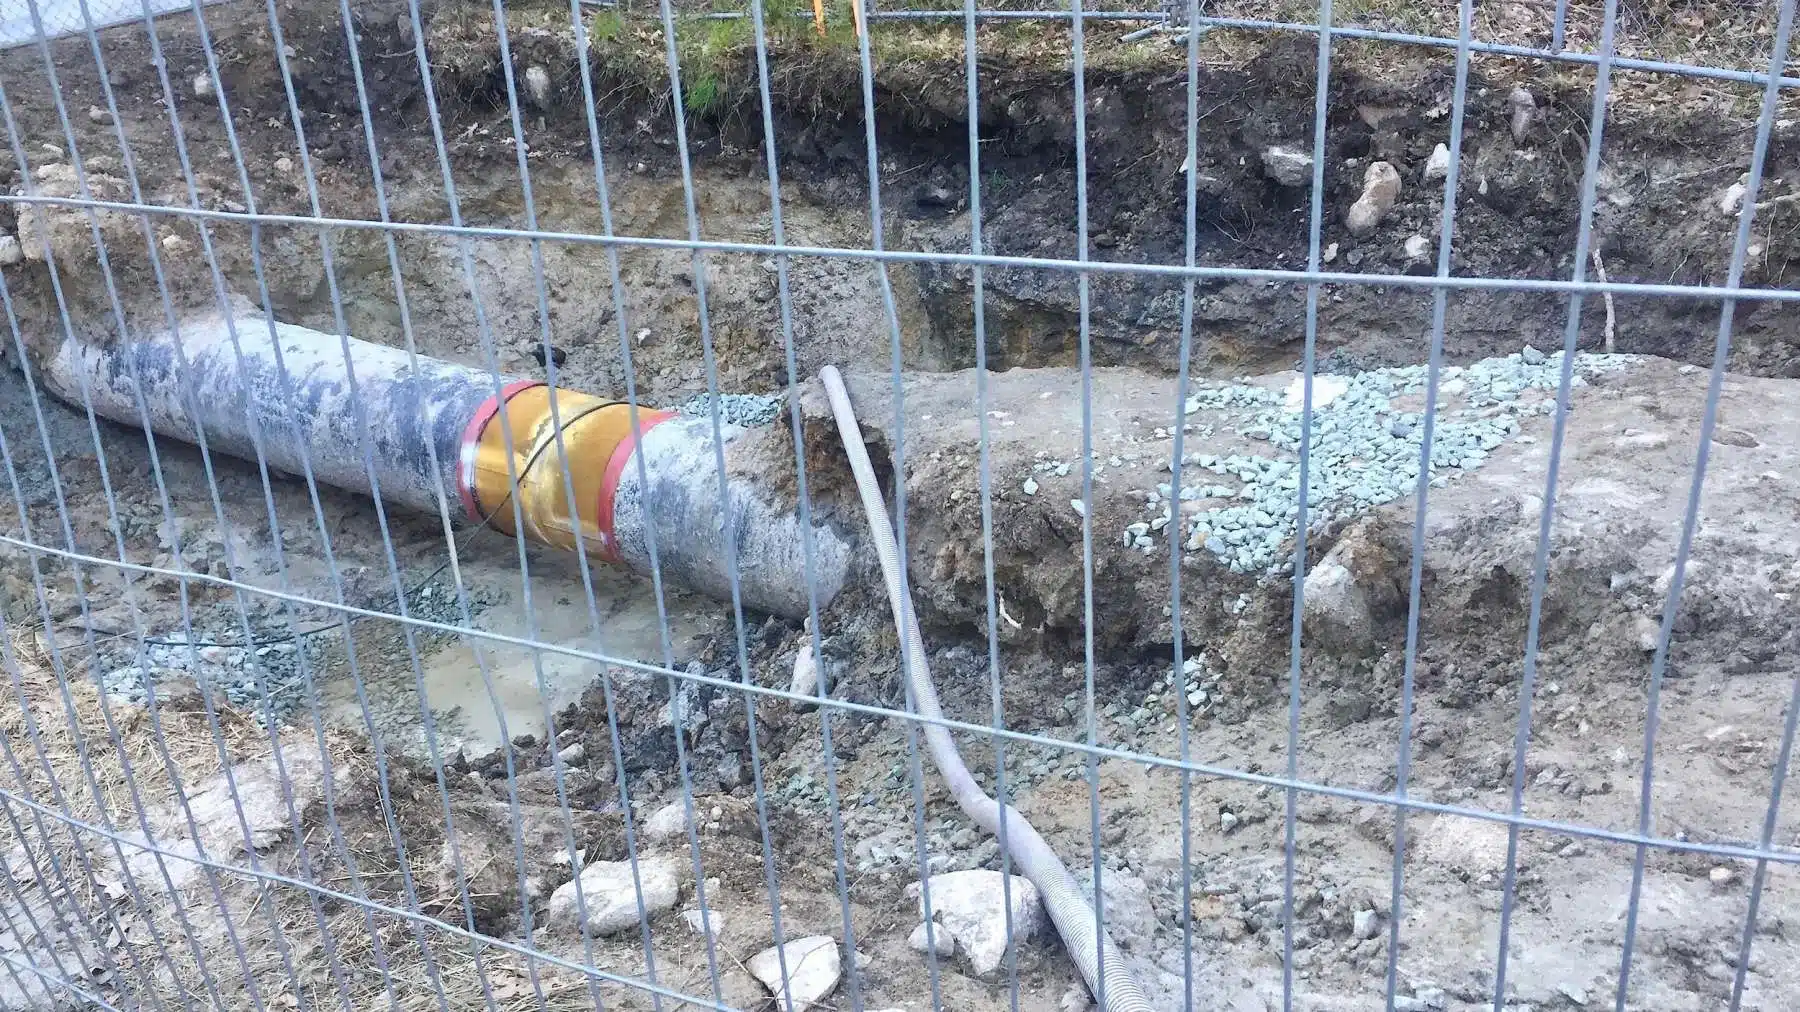 Mystery explosion, exposed gas pipelines  and heavy construction reported in Burrillville